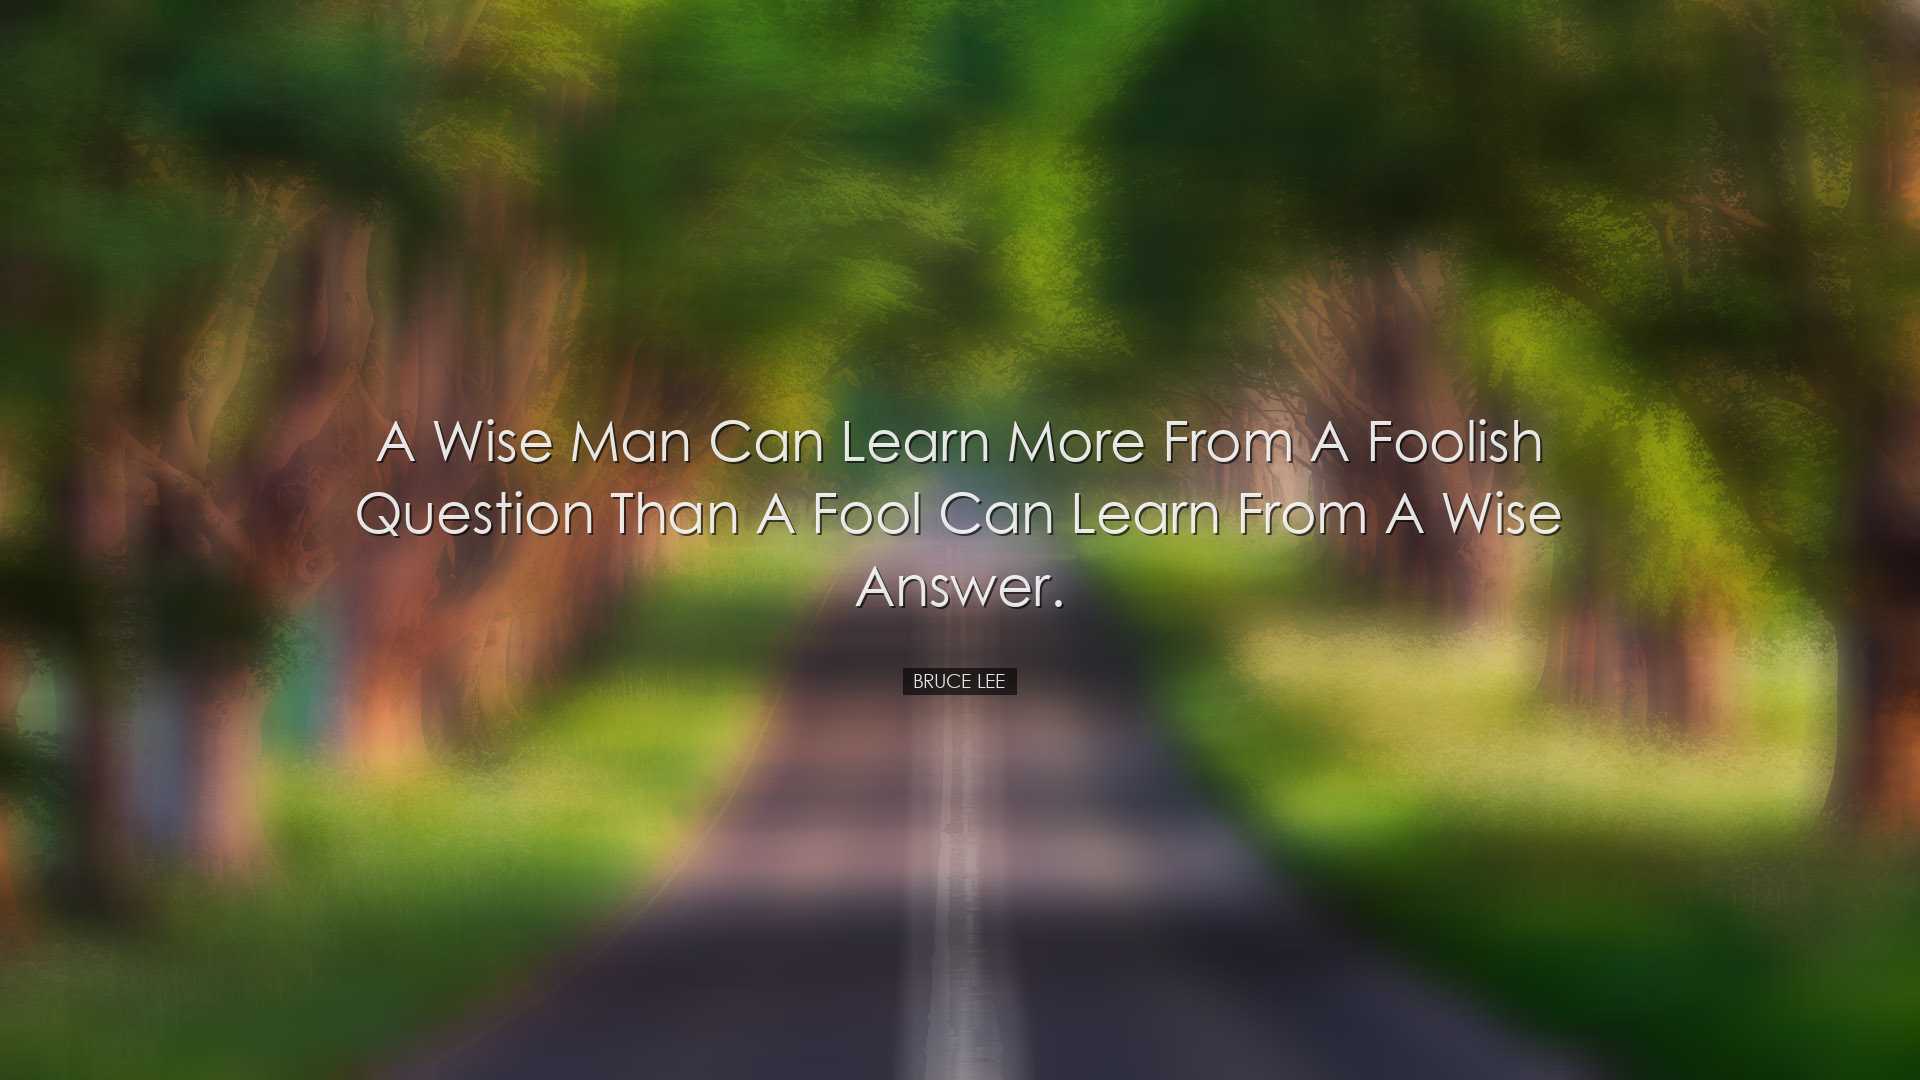 A wise man can learn more from a foolish question than a fool can